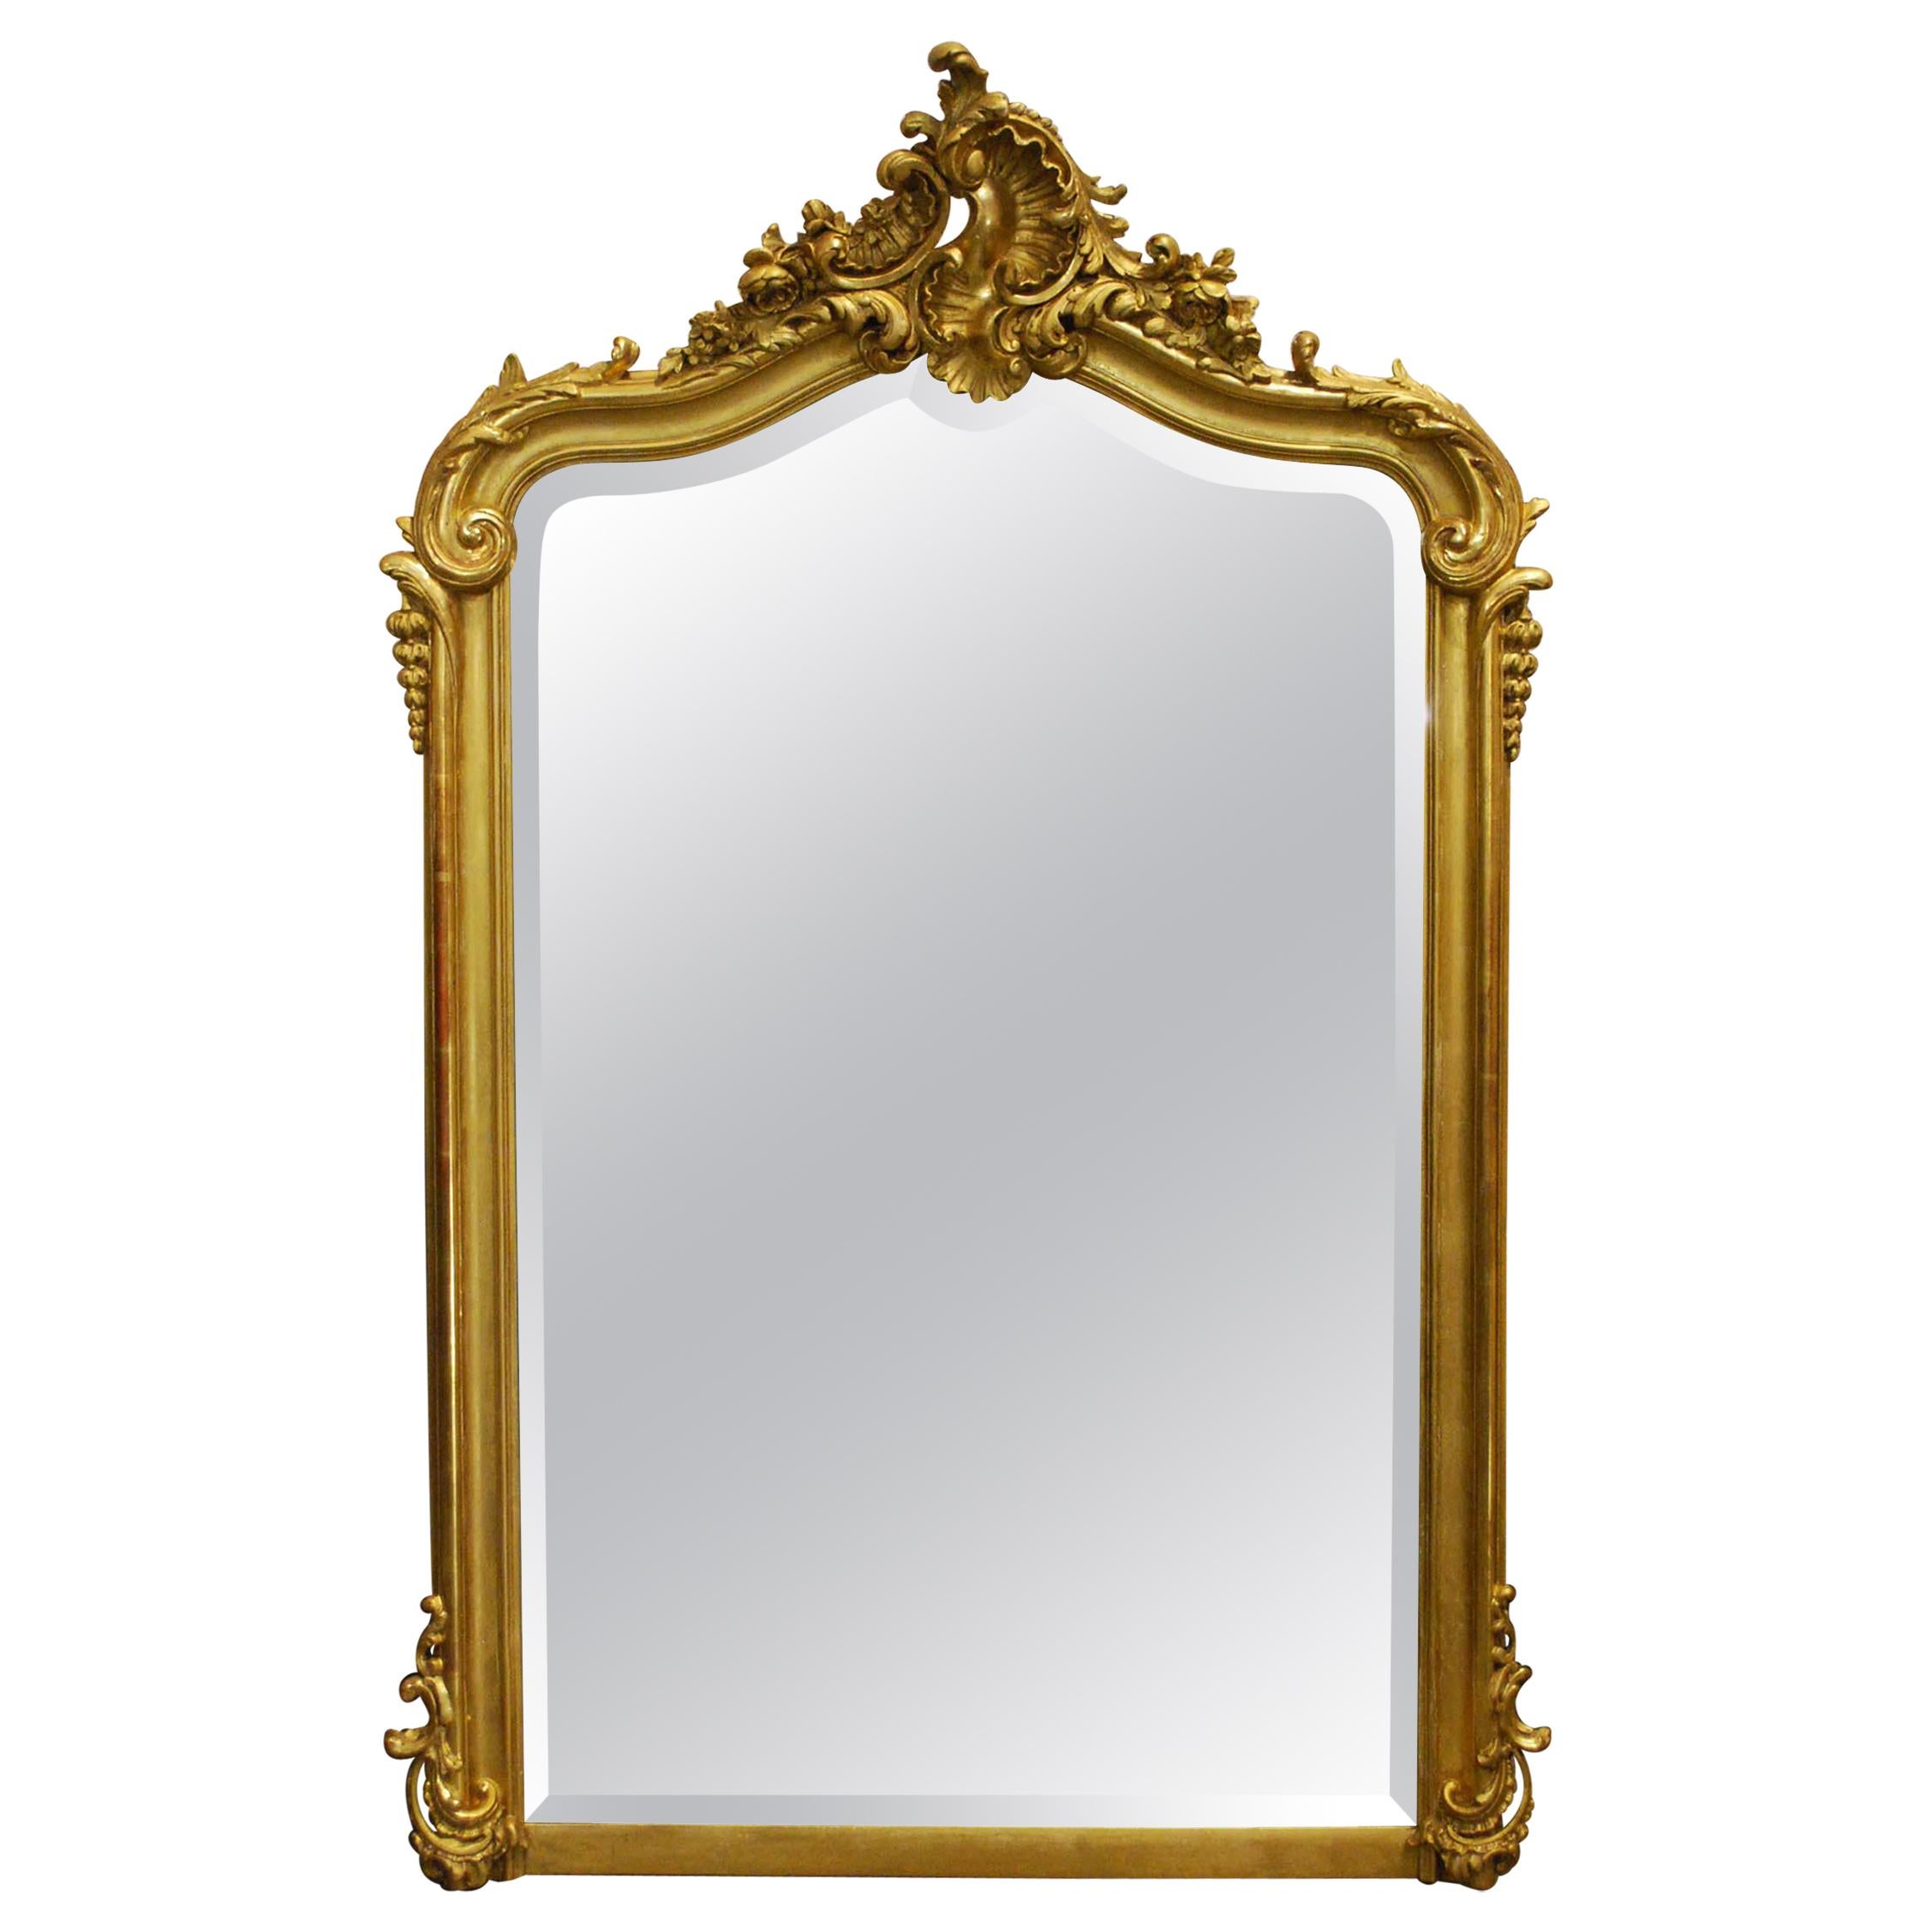 Antique French Louis Quinze or Rococo Gold Gilt Mirror with Facetted Glass